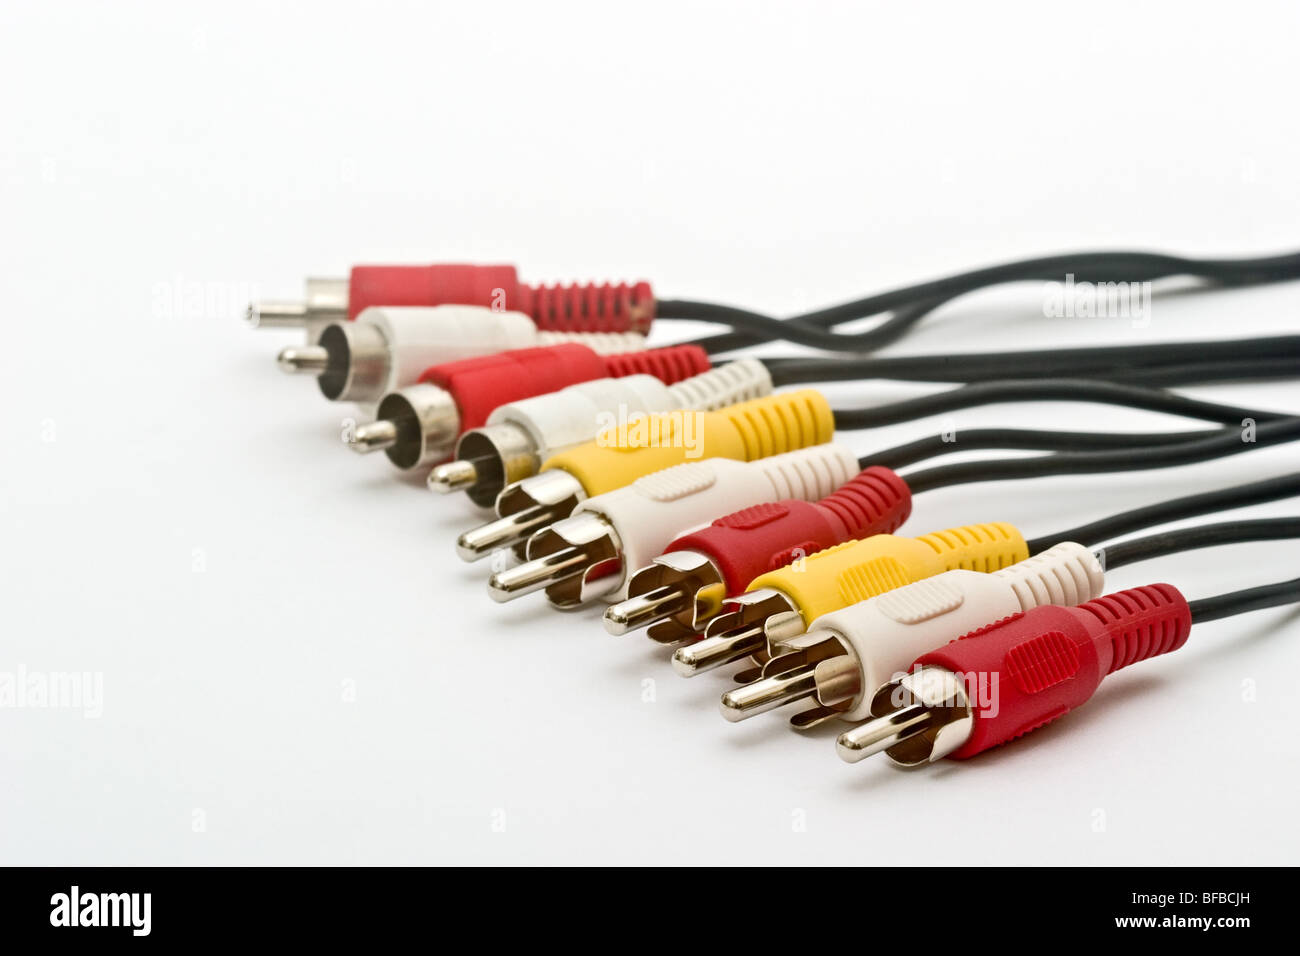 Row of red, white and yellow audio connectors attached to wires Stock Photo